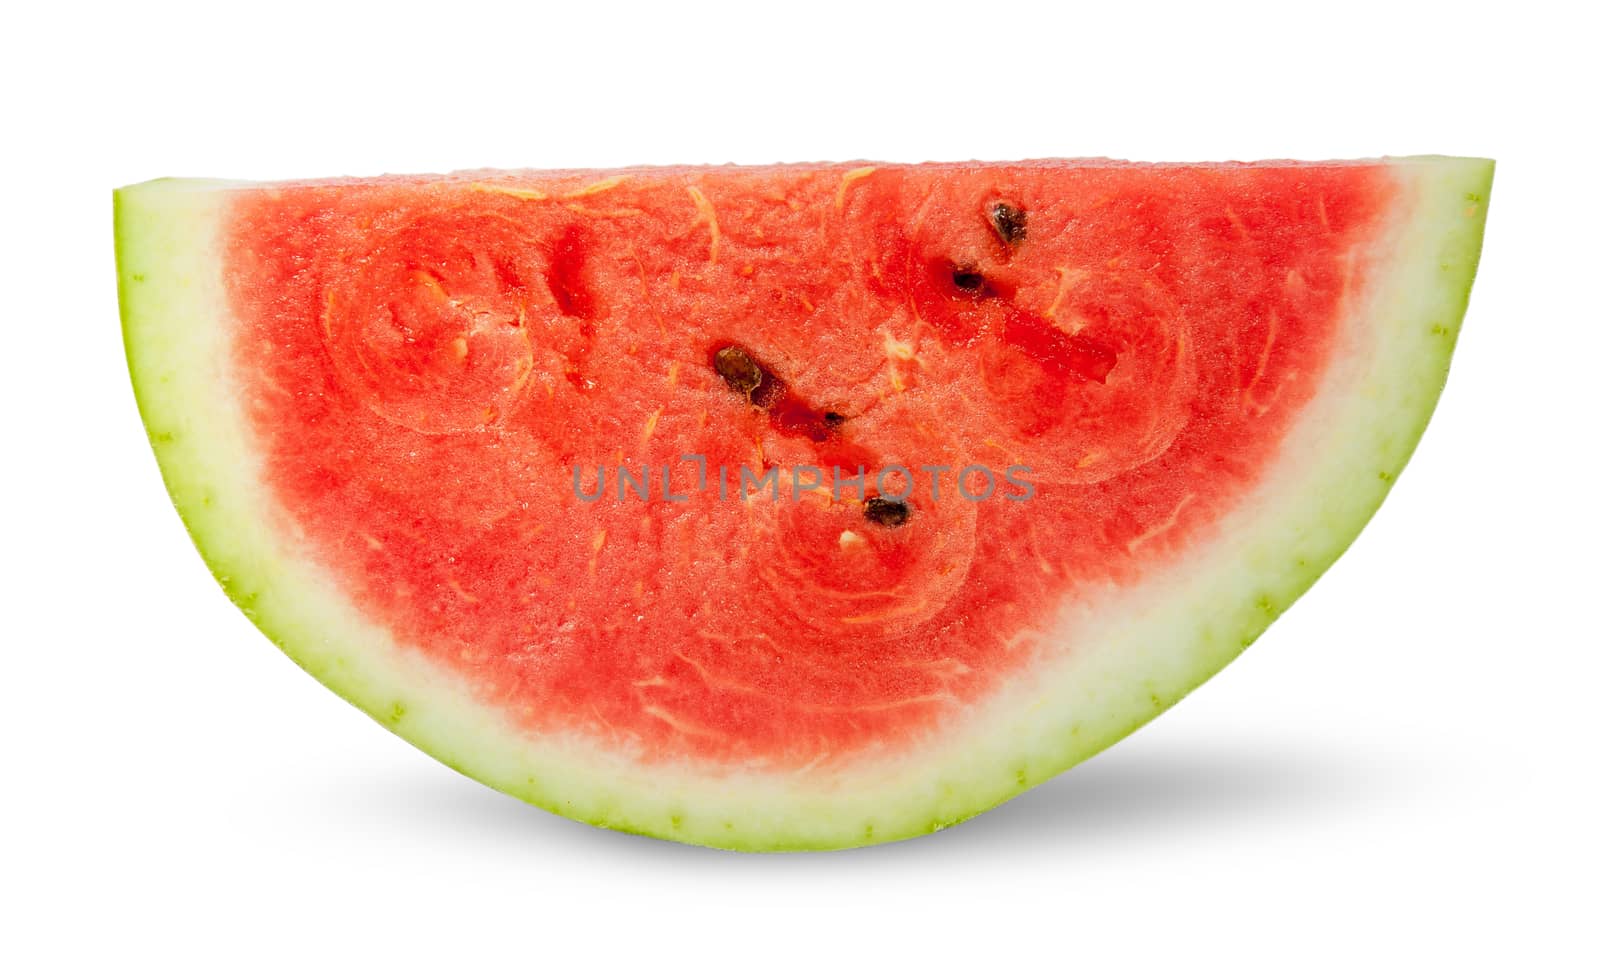 One red slice of ripe watermelon by Cipariss